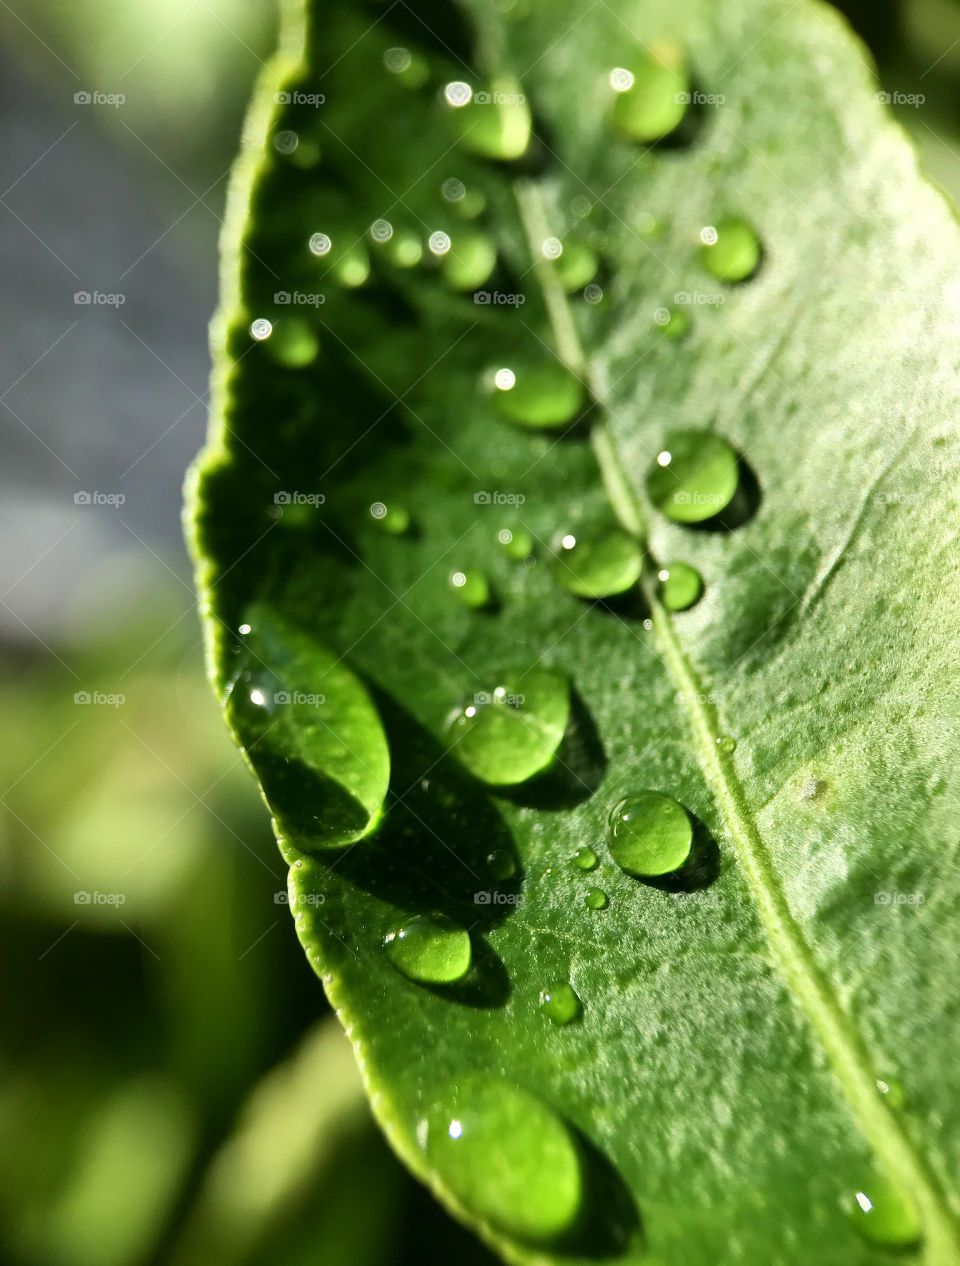 Sunny after raining make me got this photo. look at the reflction of water and green leaf, doen't make you feel fresh?